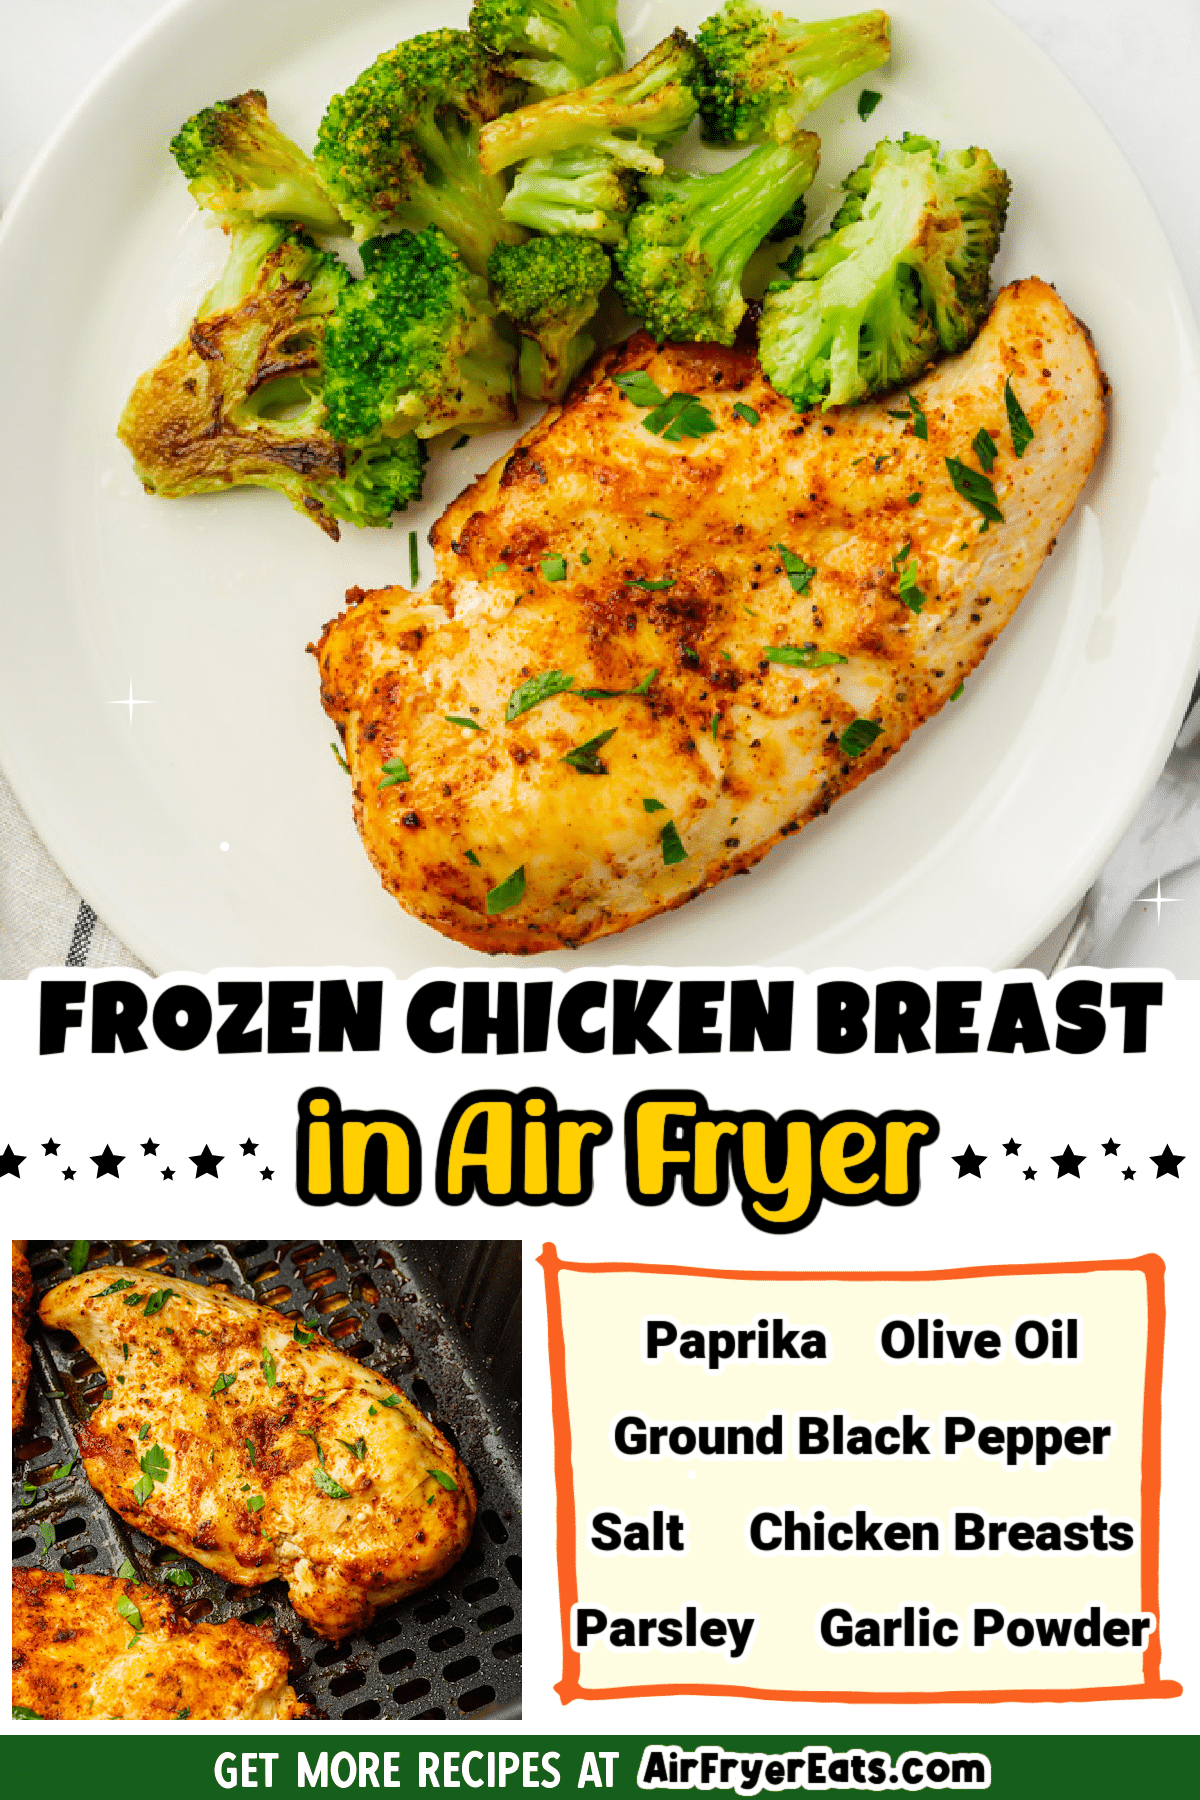 Cooking Frozen Chicken Breast in the Air Fryer is the quickest and most simple way to get dinner on the table in a flash! There's no need to thaw chicken breasts when you use this simple air fryer recipe. via @vegetarianmamma